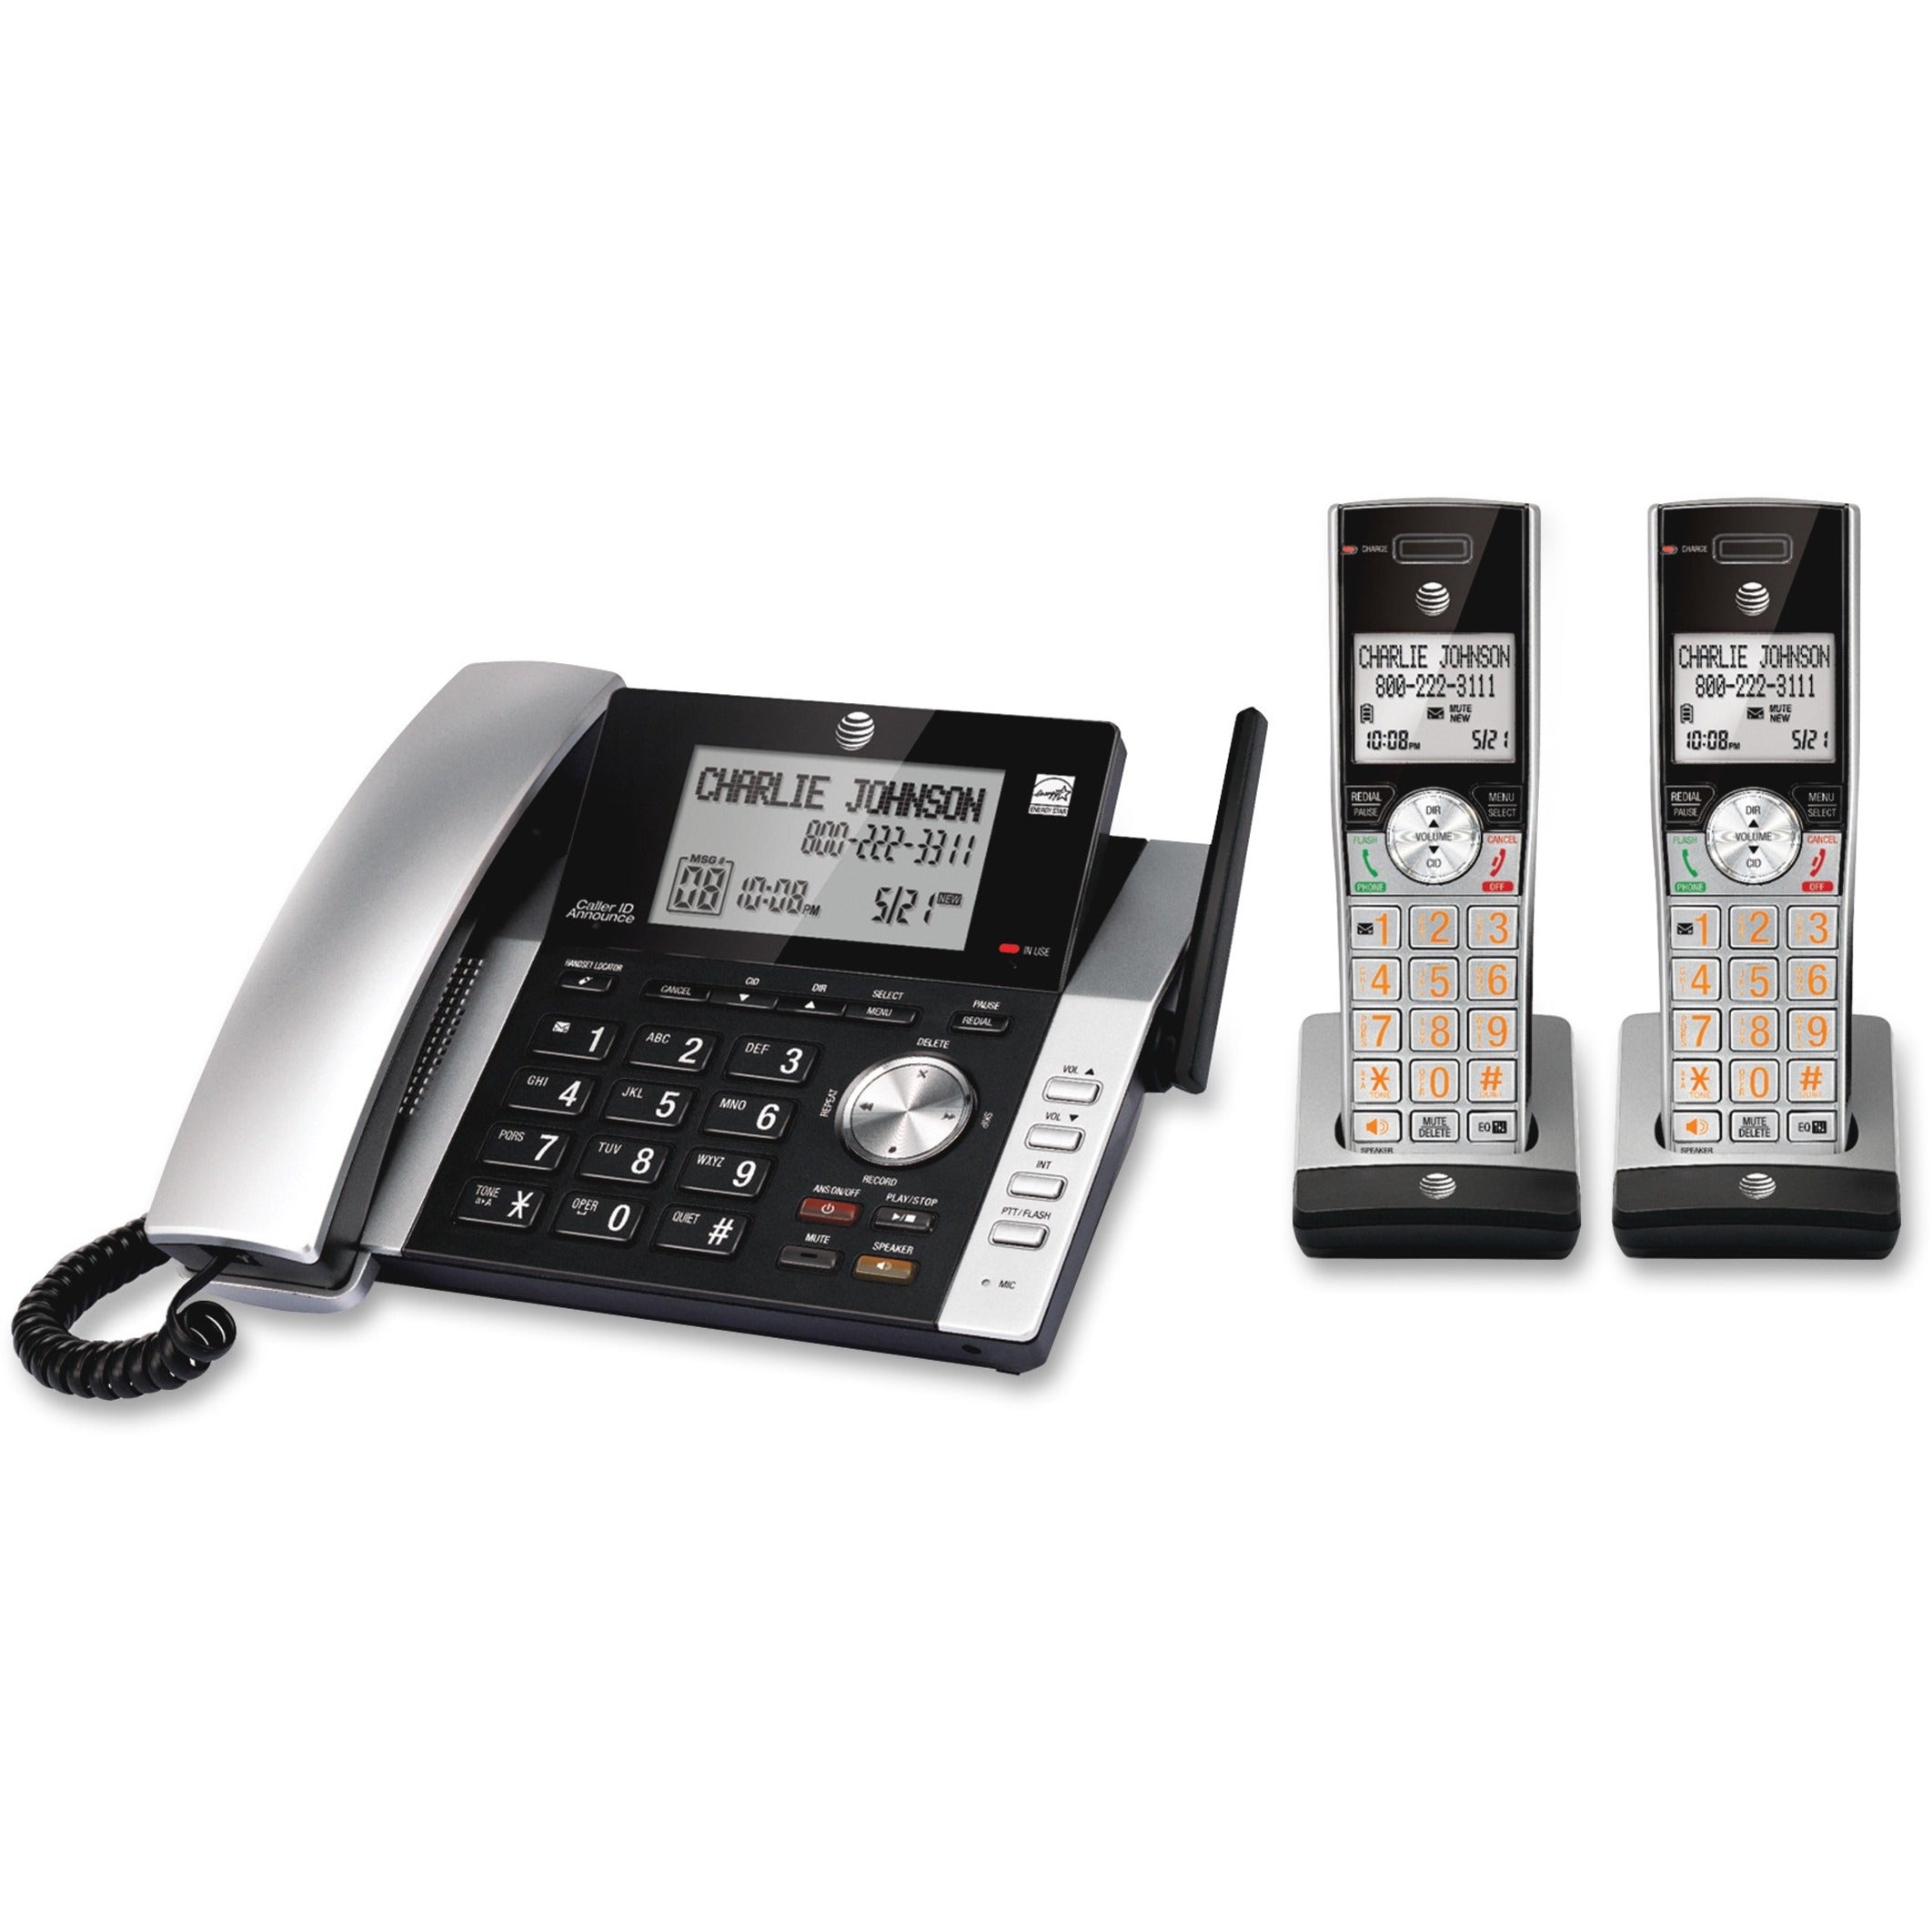 AT&T CL84215 DECT 6.0 Cordless Phone, Silver - 1.90 GHz, Caller ID/Call Waiting, Speakerphone